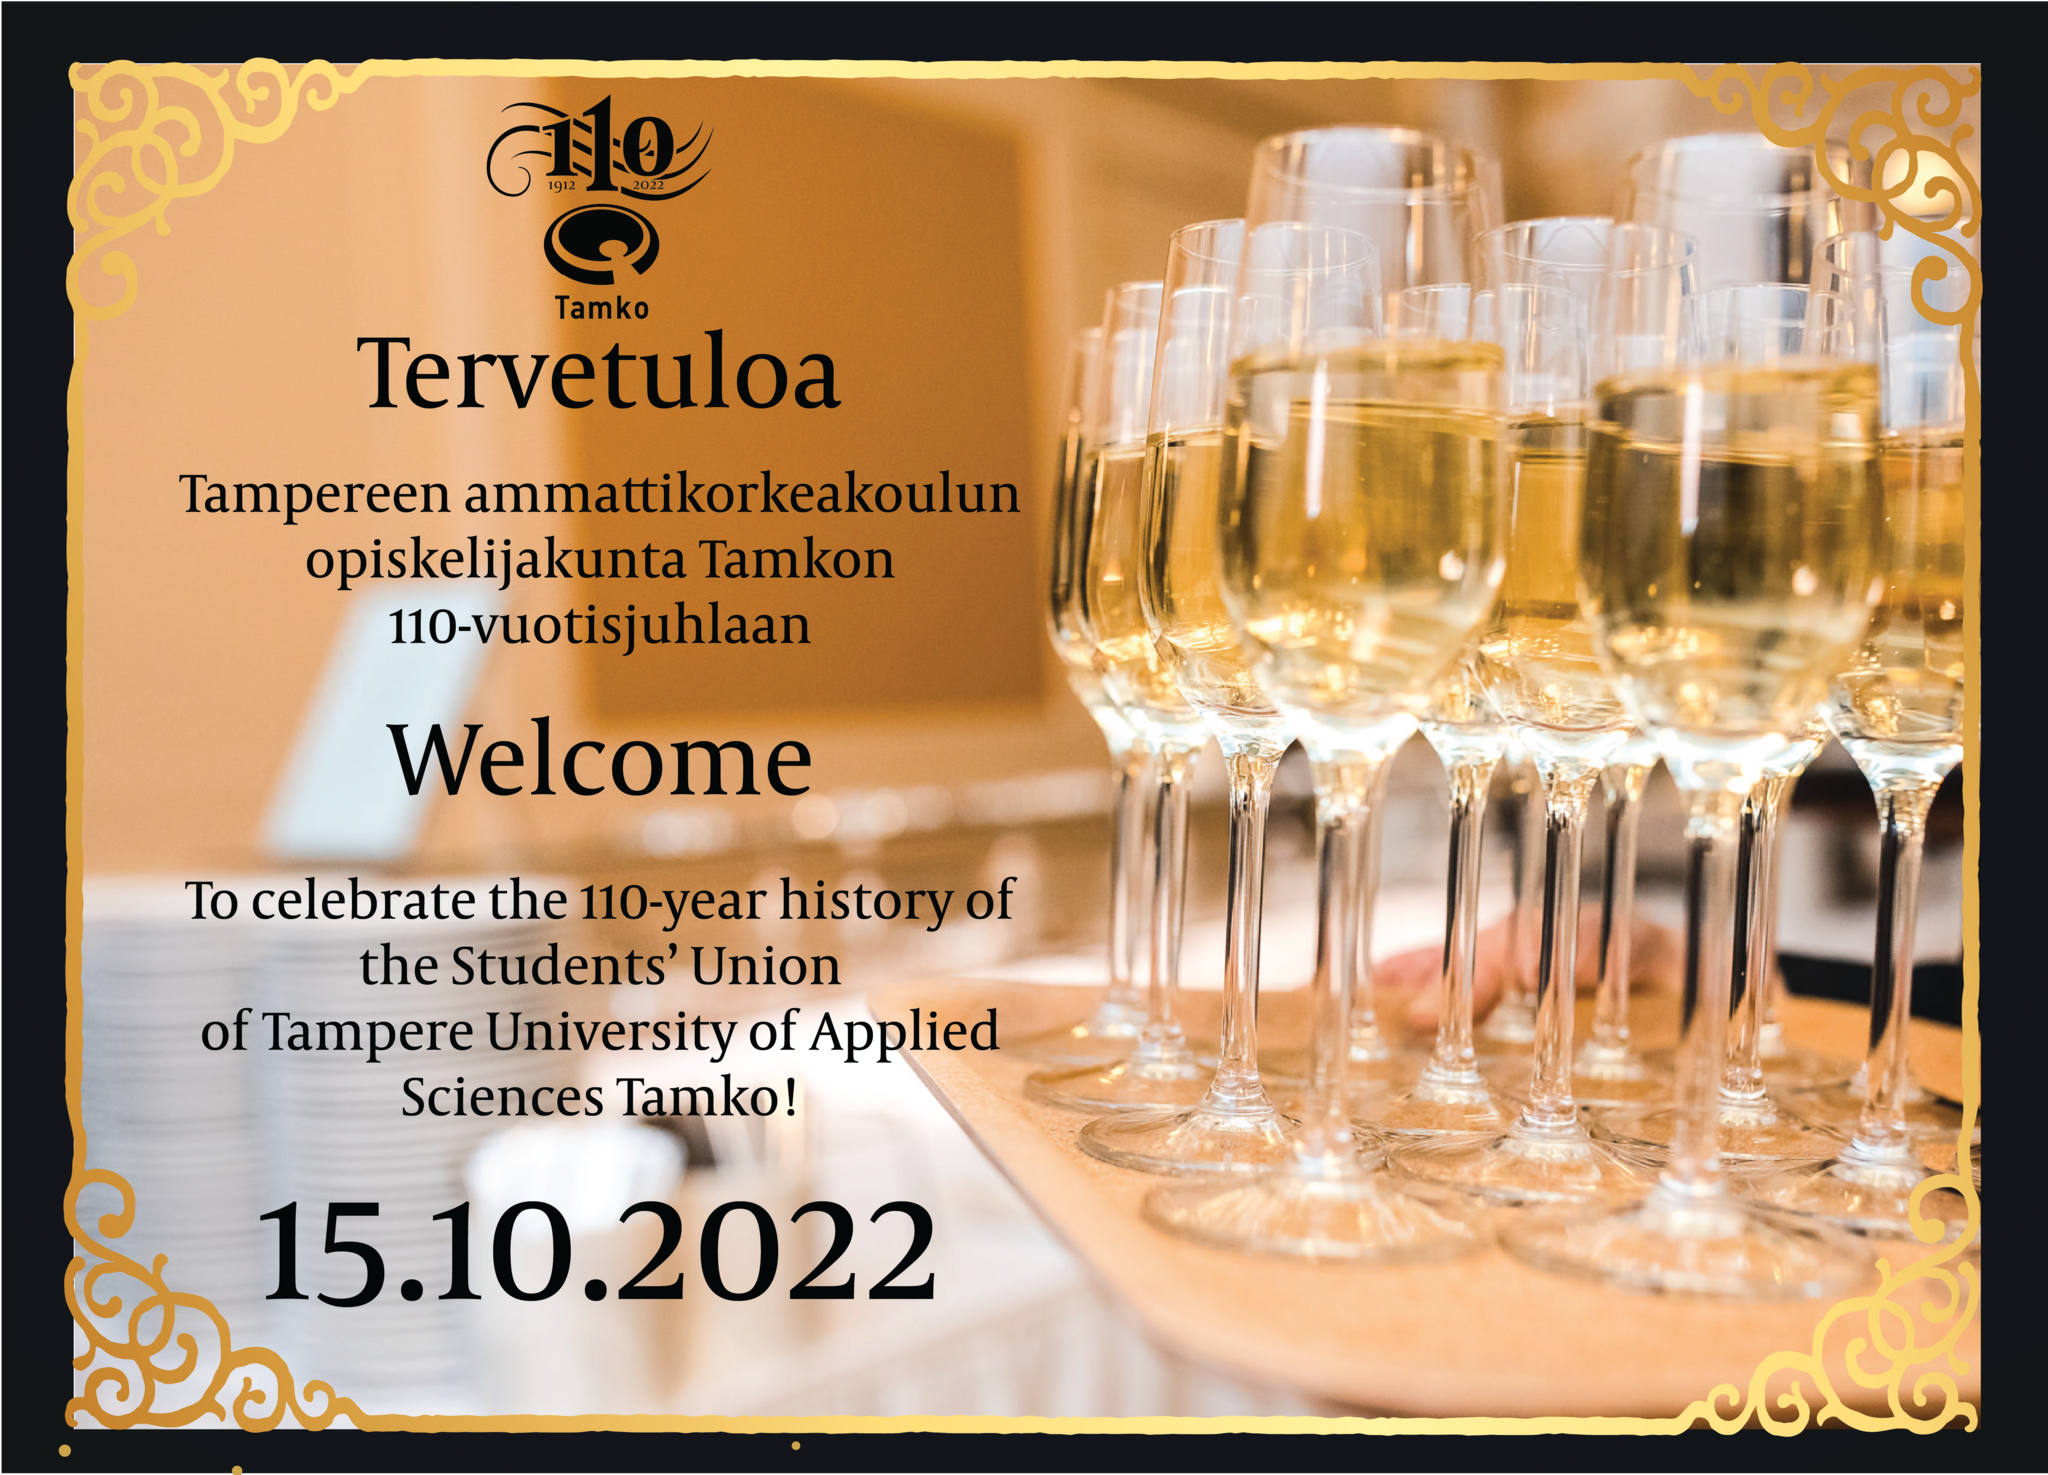 Welcome to celebrate Tamko’s 110-year history 15.10.2022!